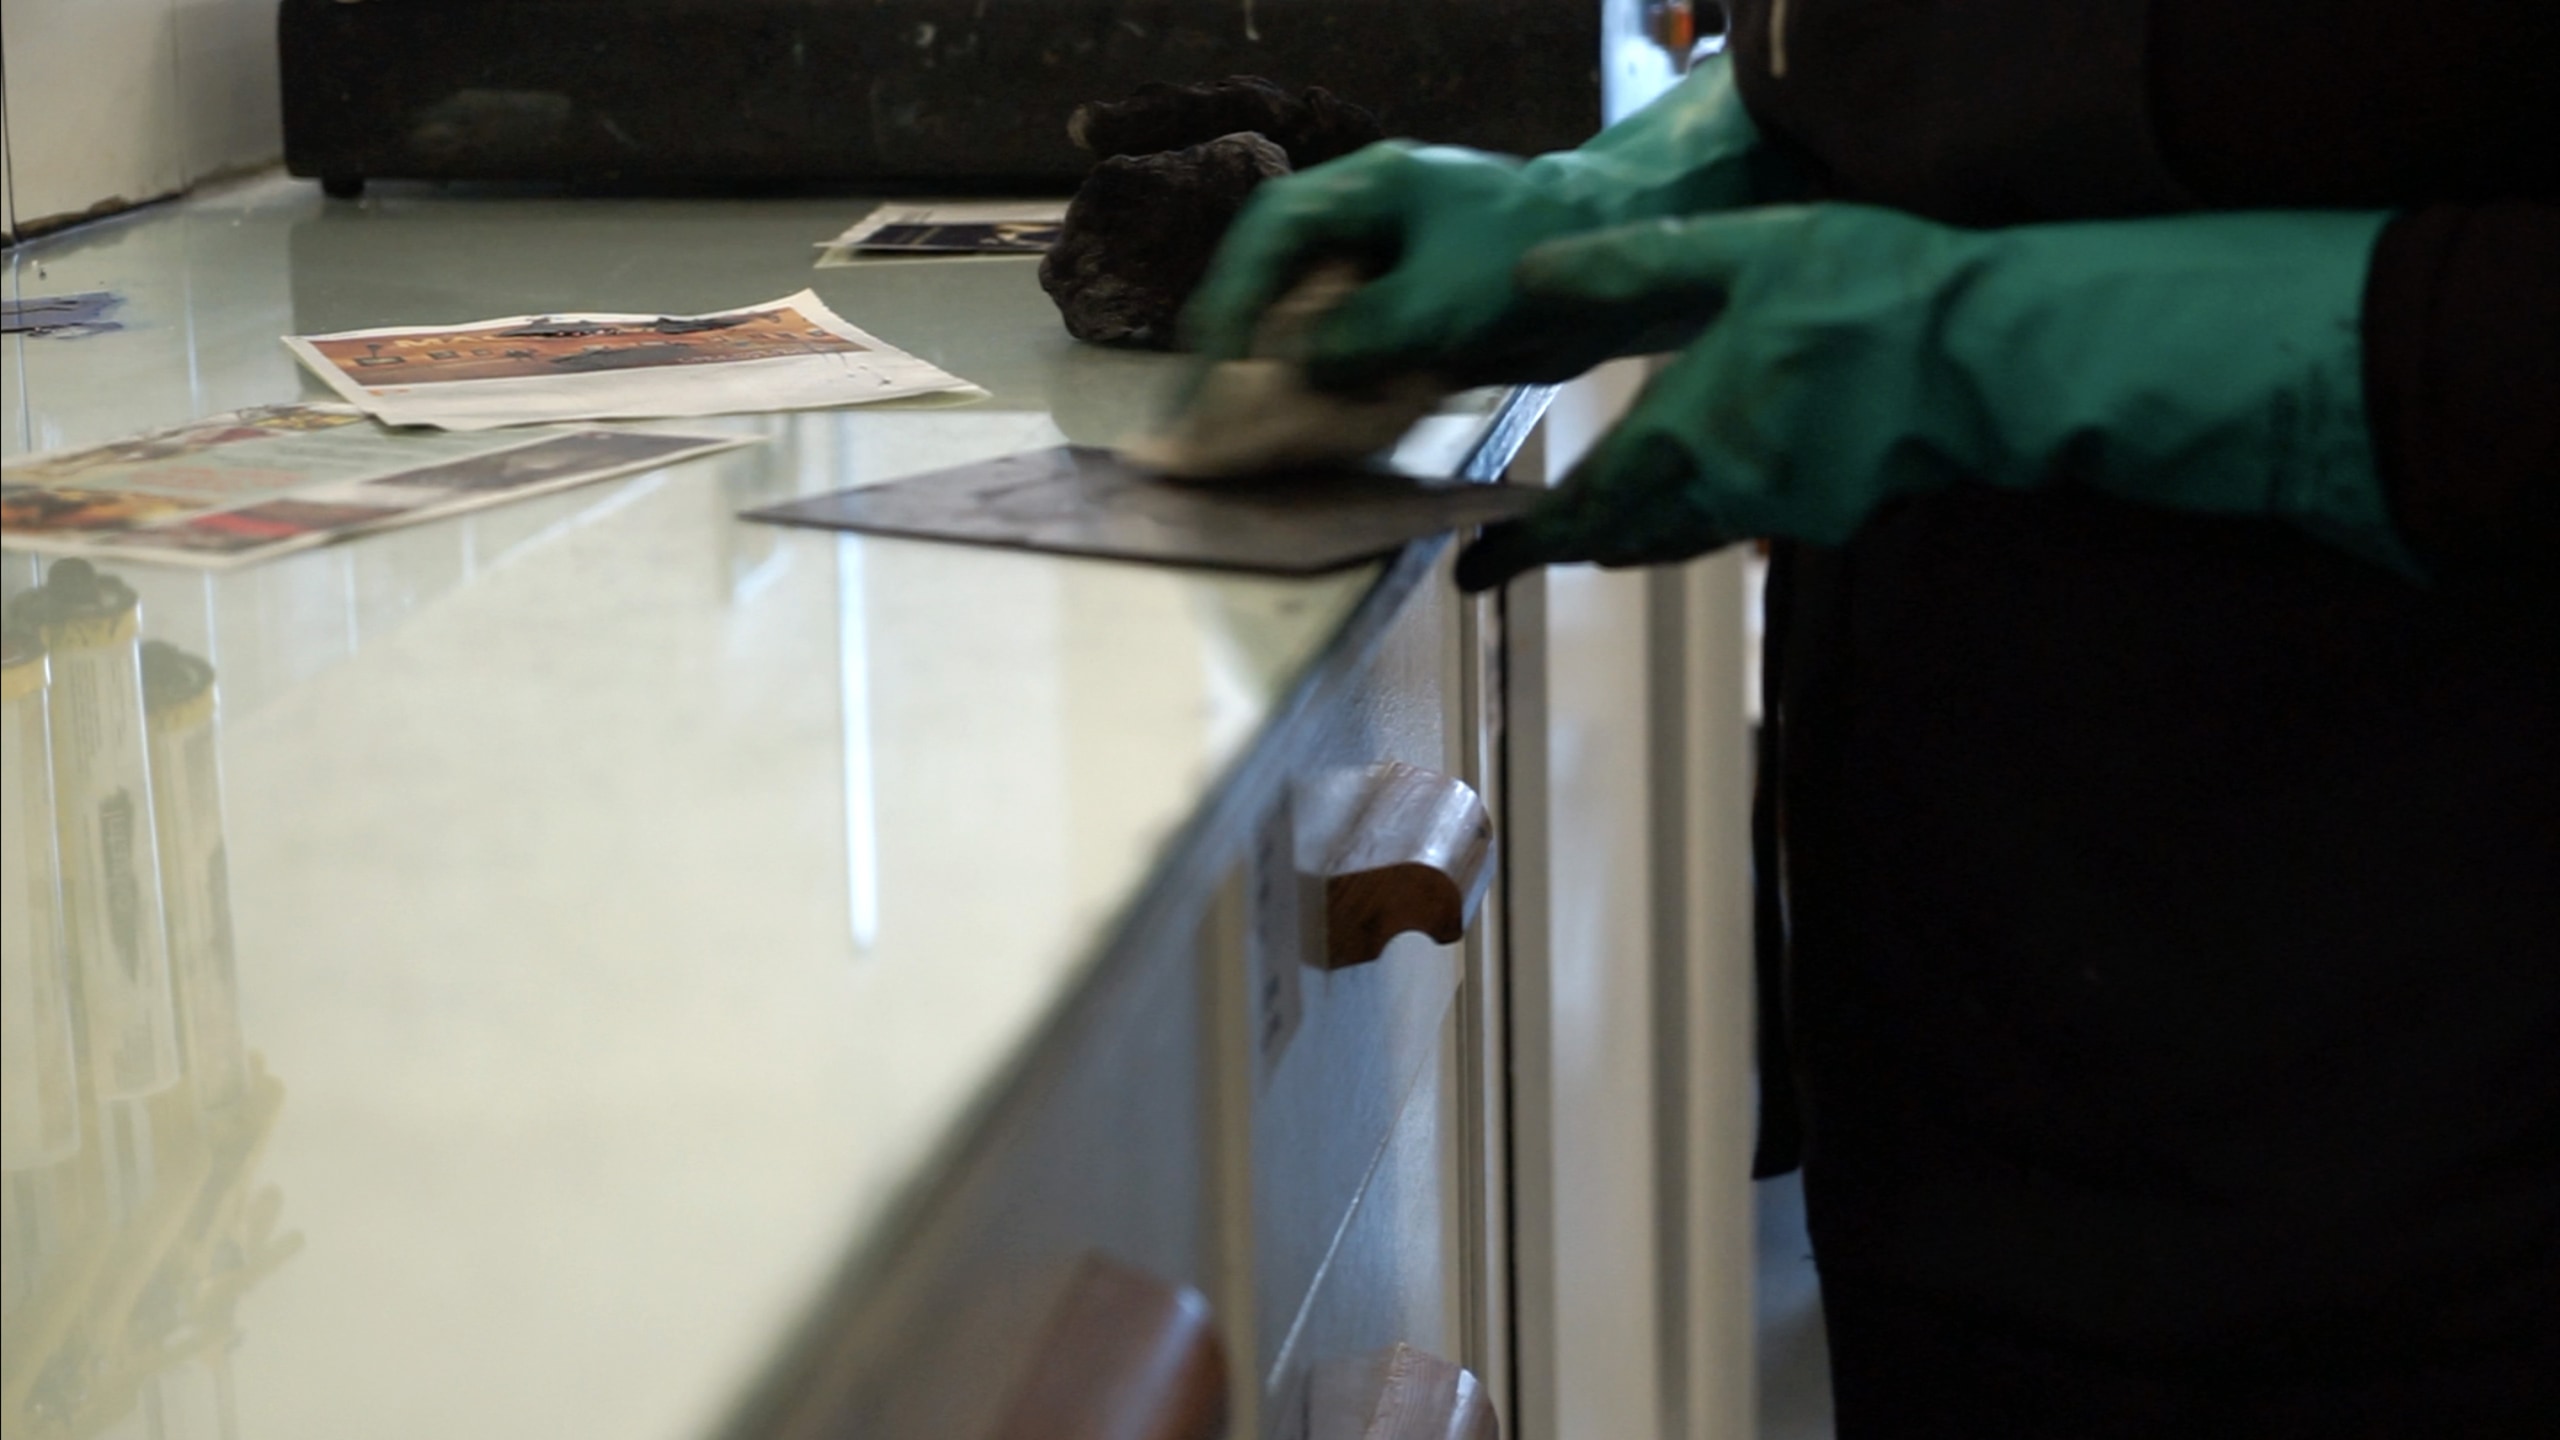 An Etching being handled by a person wearing rubber gauntlets